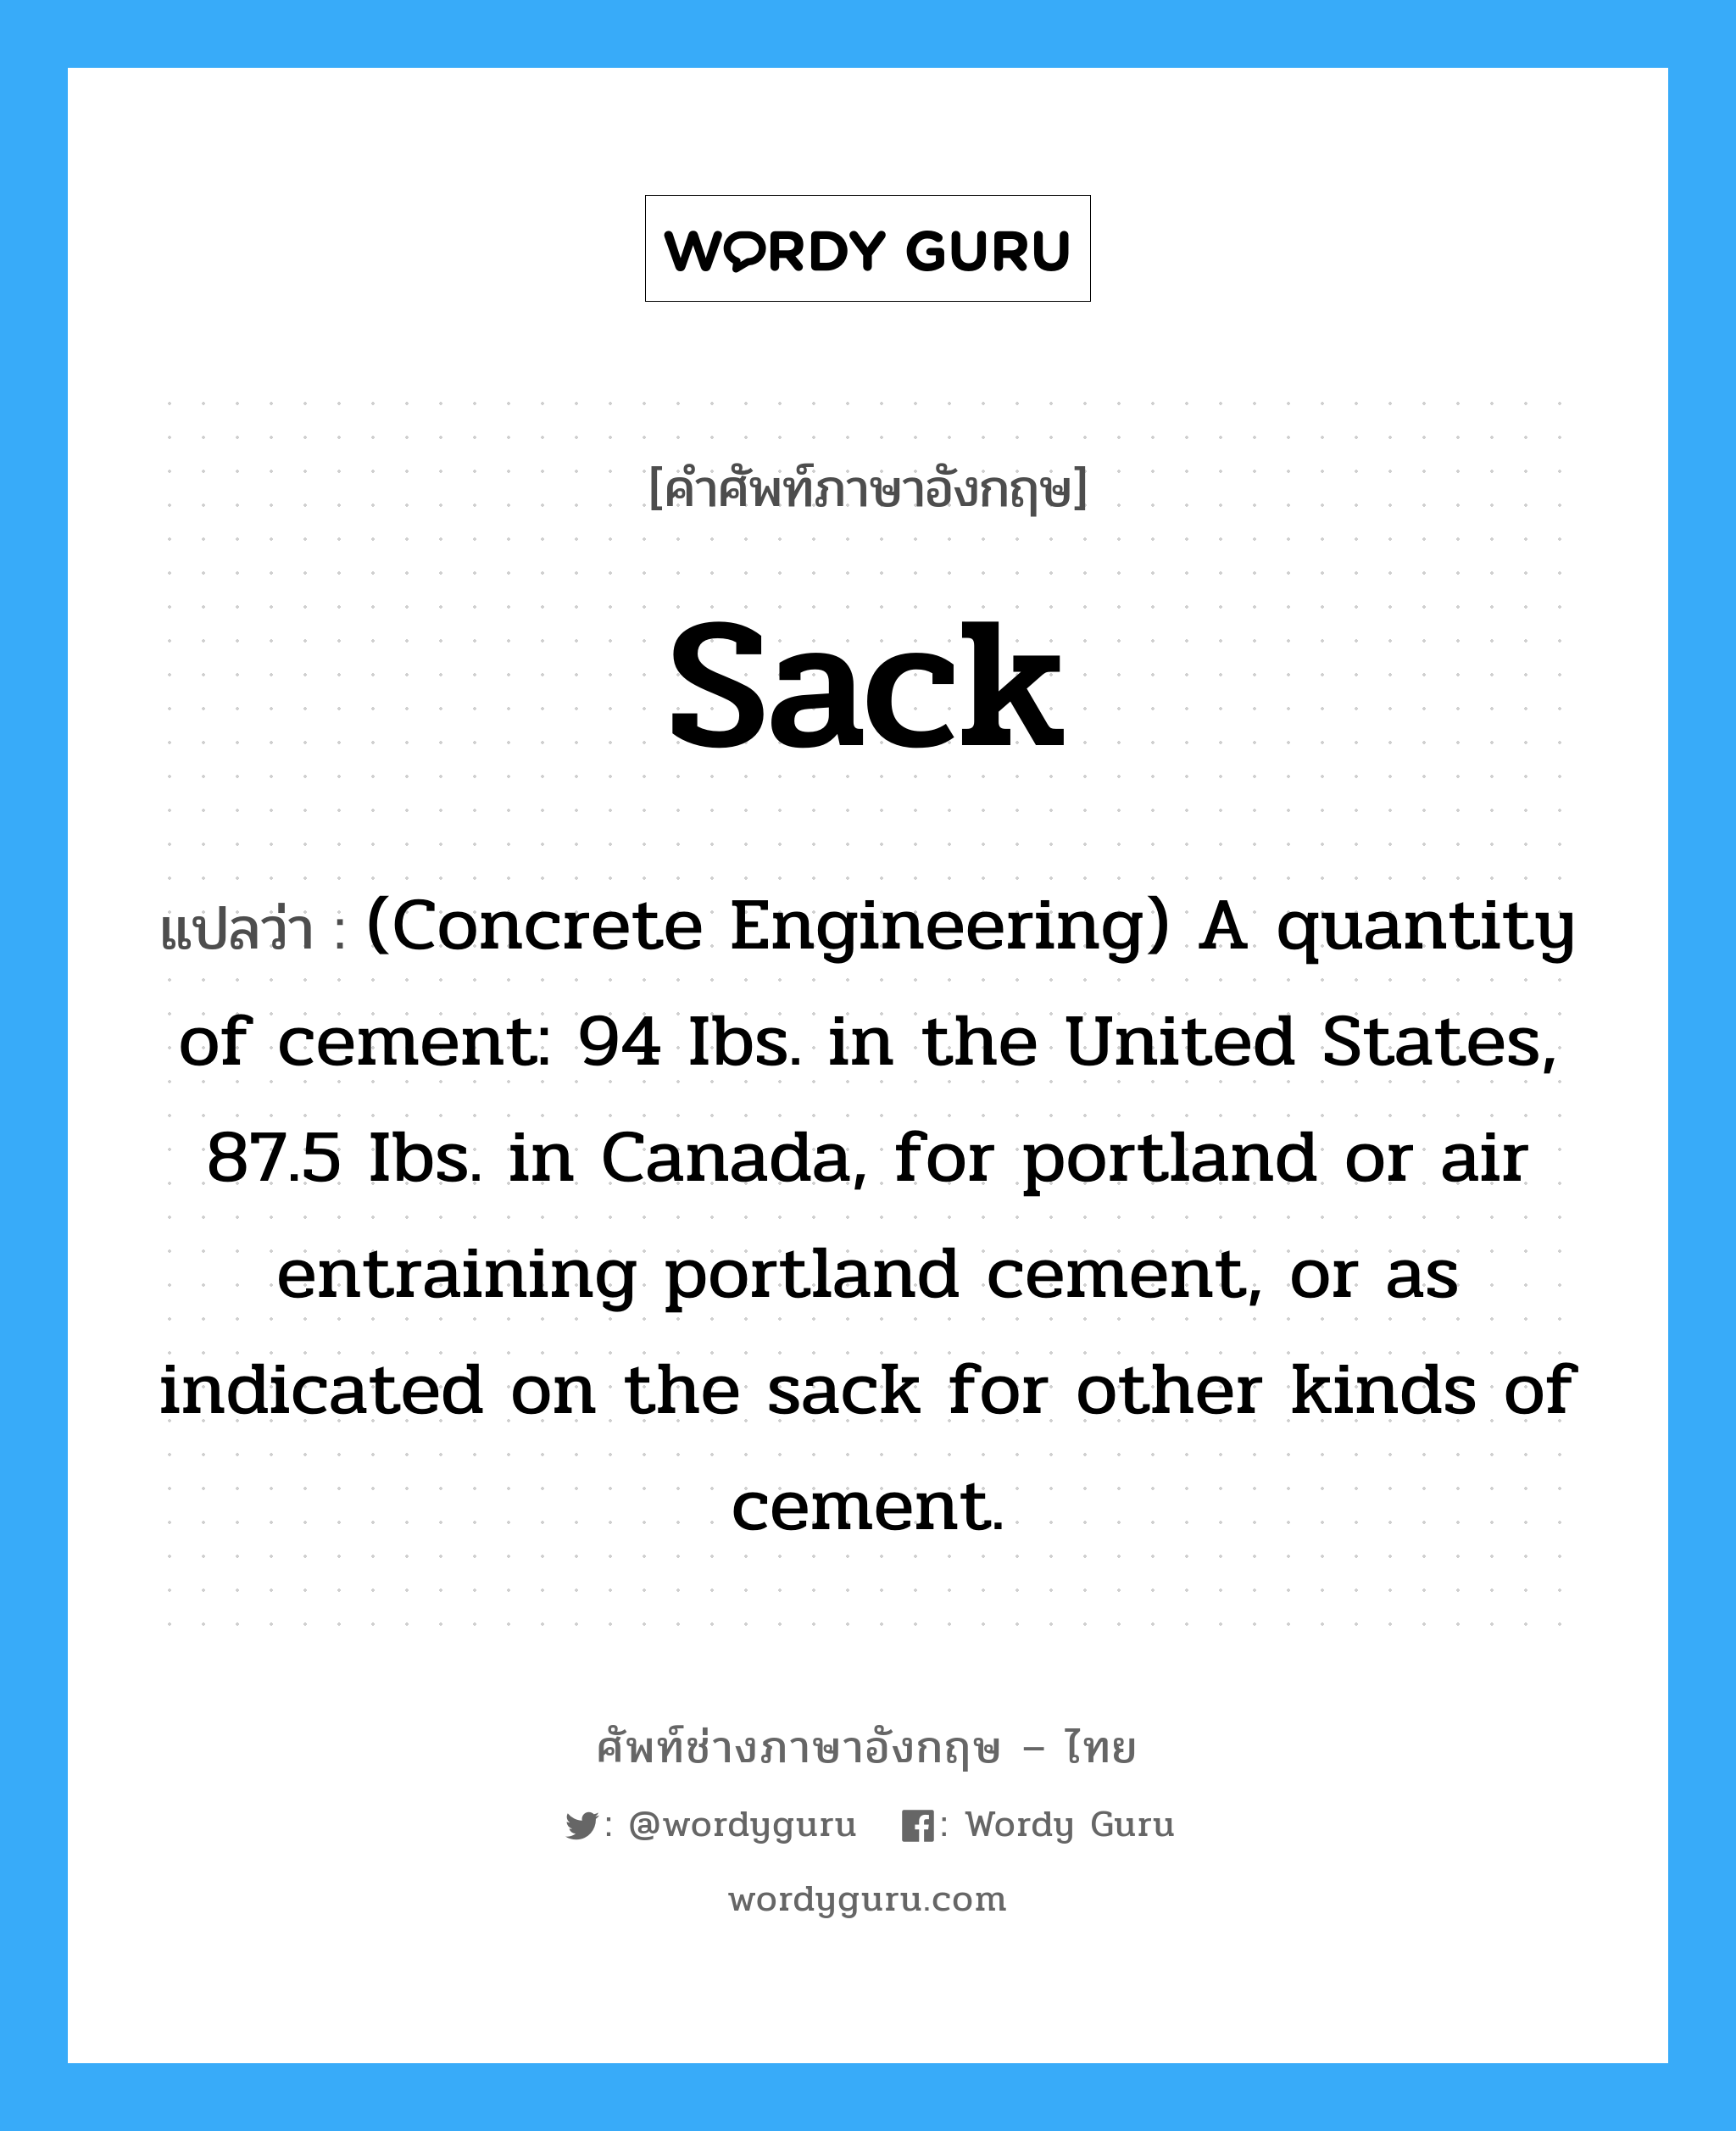 Sack แปลว่า?, คำศัพท์ช่างภาษาอังกฤษ - ไทย Sack คำศัพท์ภาษาอังกฤษ Sack แปลว่า (Concrete Engineering) A quantity of cement: 94 Ibs. in the United States, 87.5 Ibs. in Canada, for portland or air entraining portland cement, or as indicated on the sack for other kinds of cement.